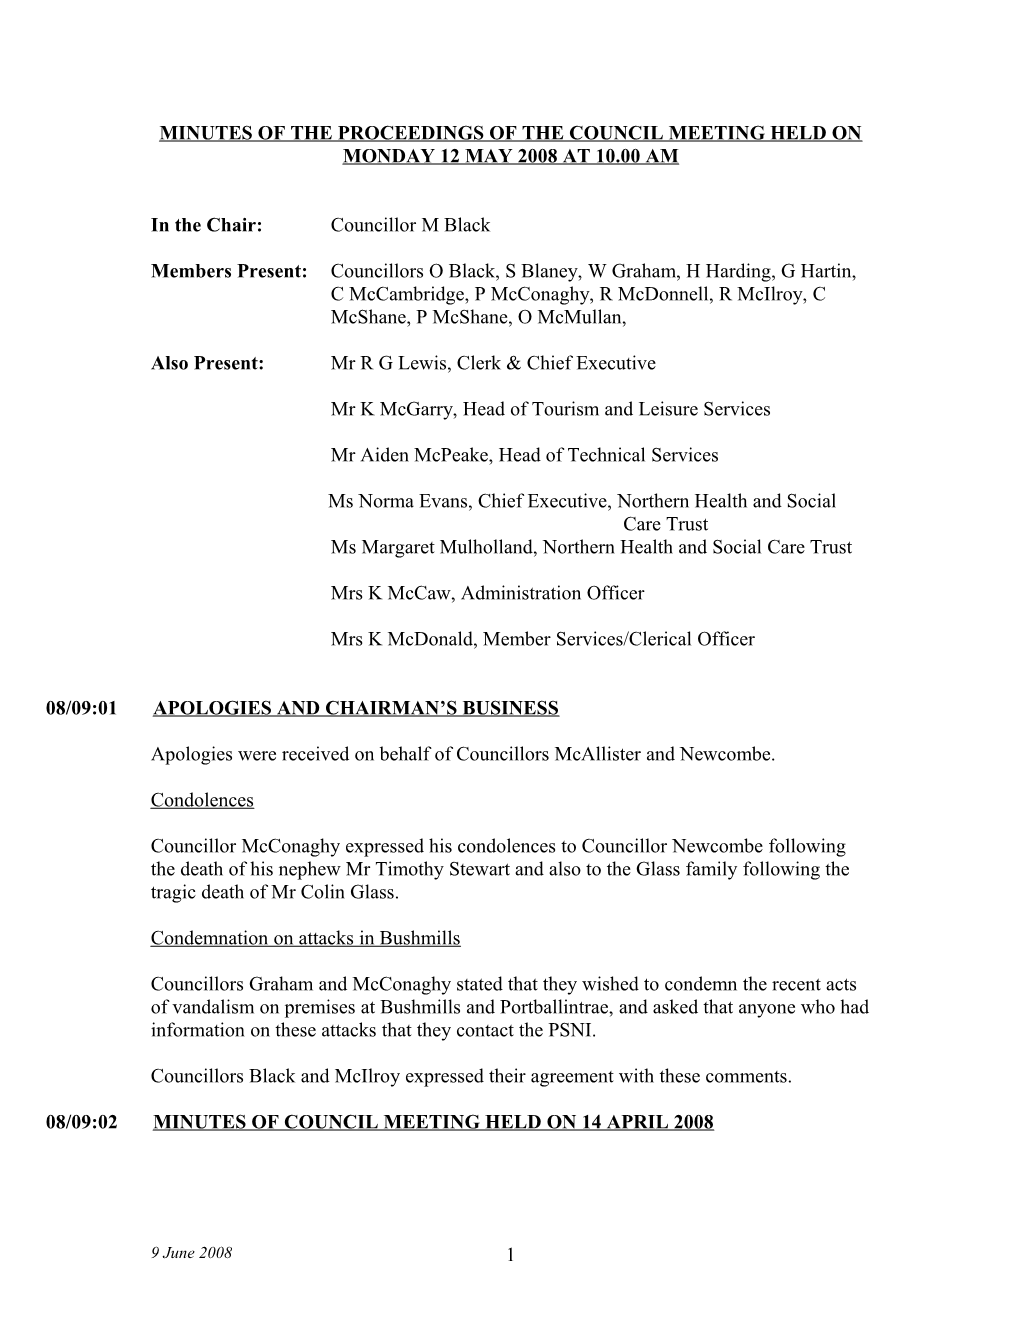 Minutes of the Proceedings of the Council Meeting Held on Monday 12 May 2008 at 10